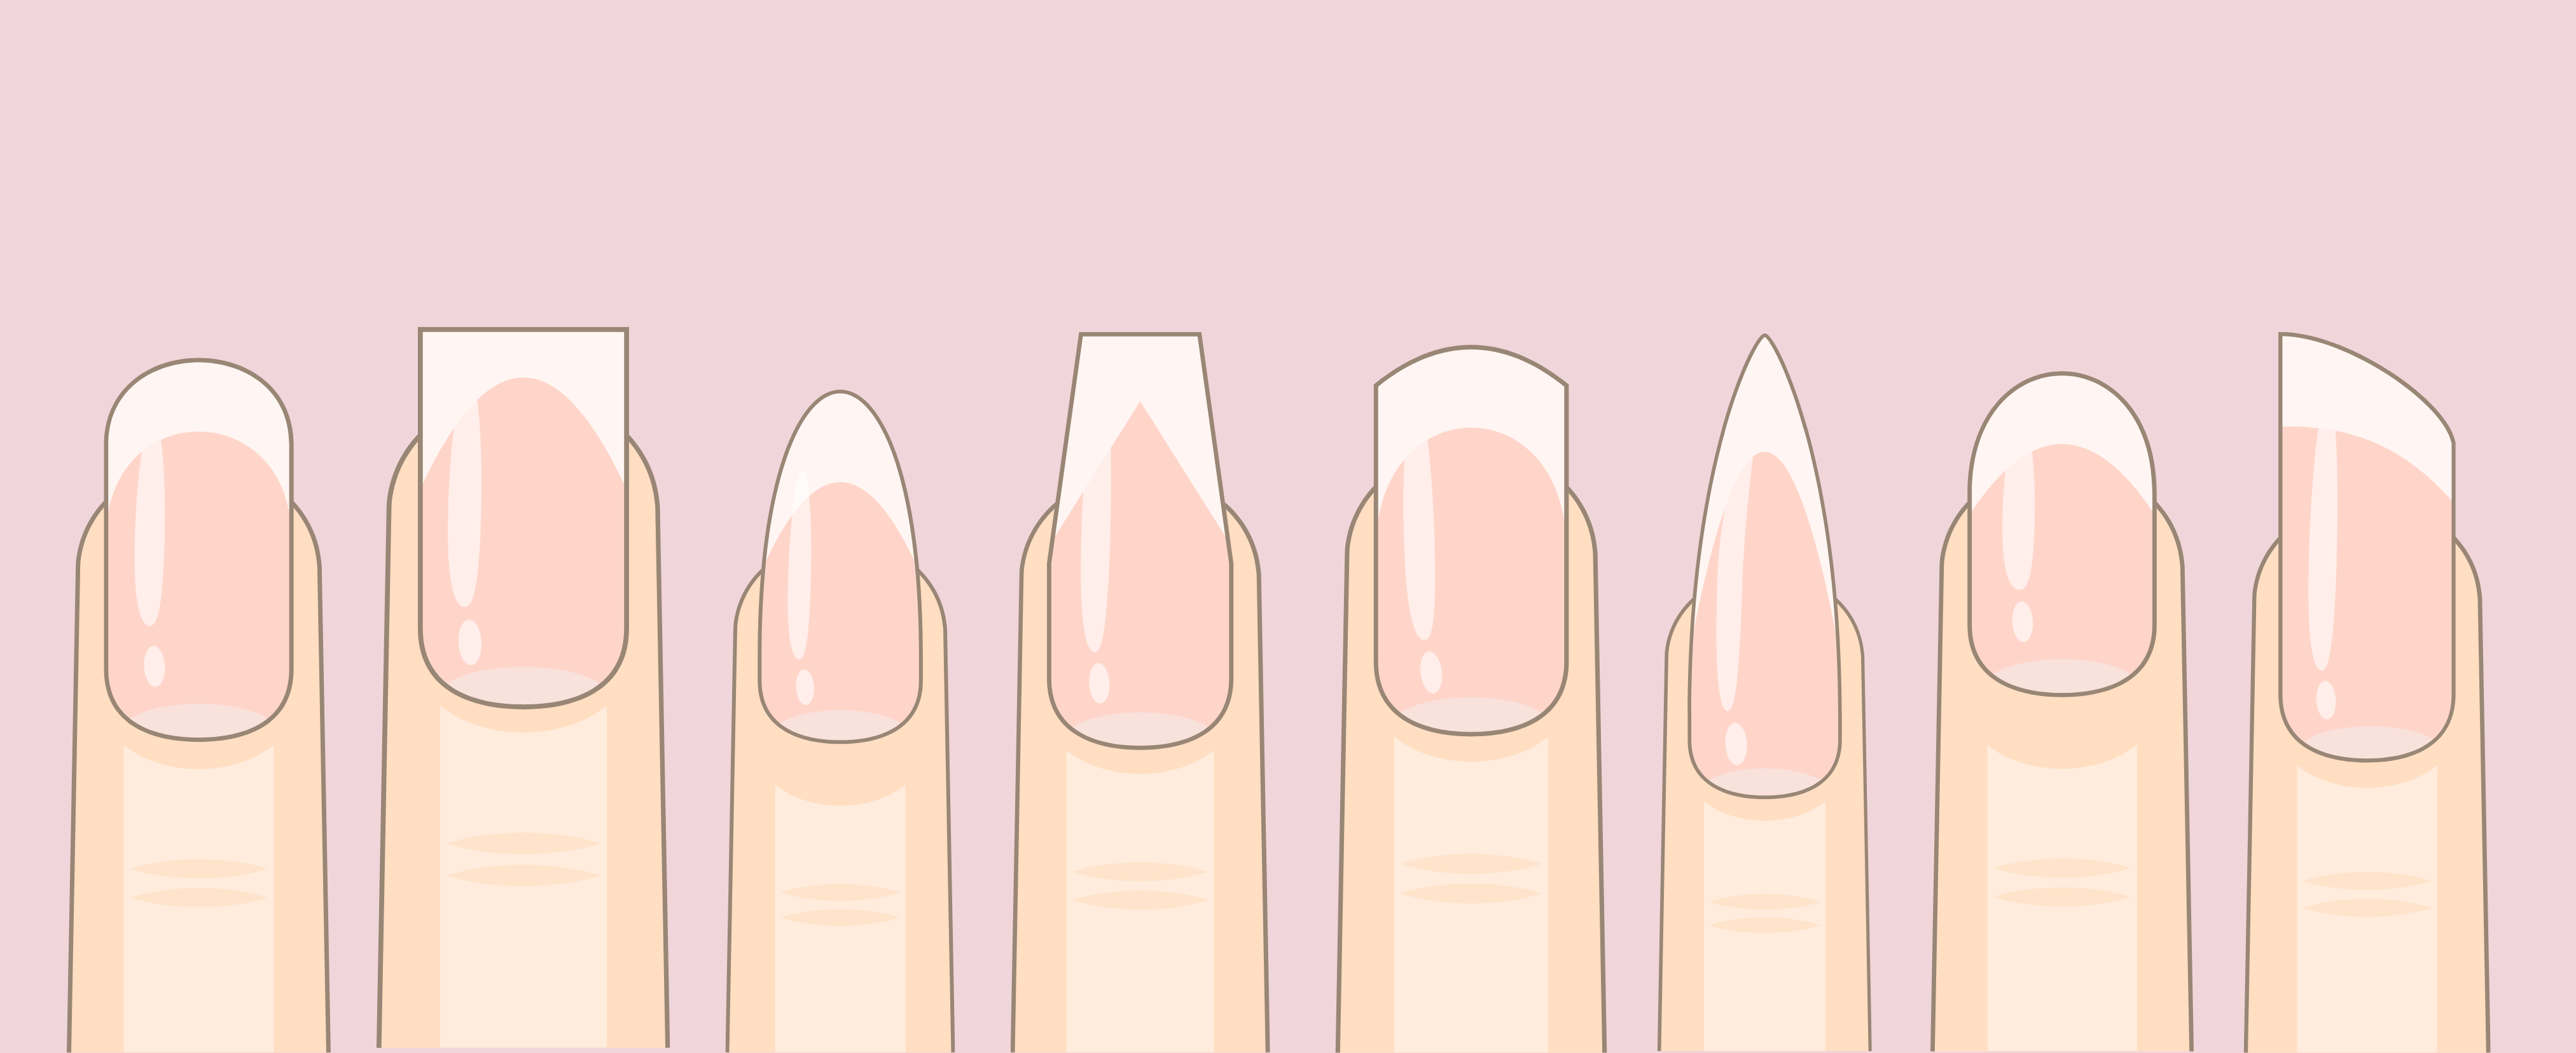 What nail shape is mostly a rectangular figure with rounded corners? - Quora